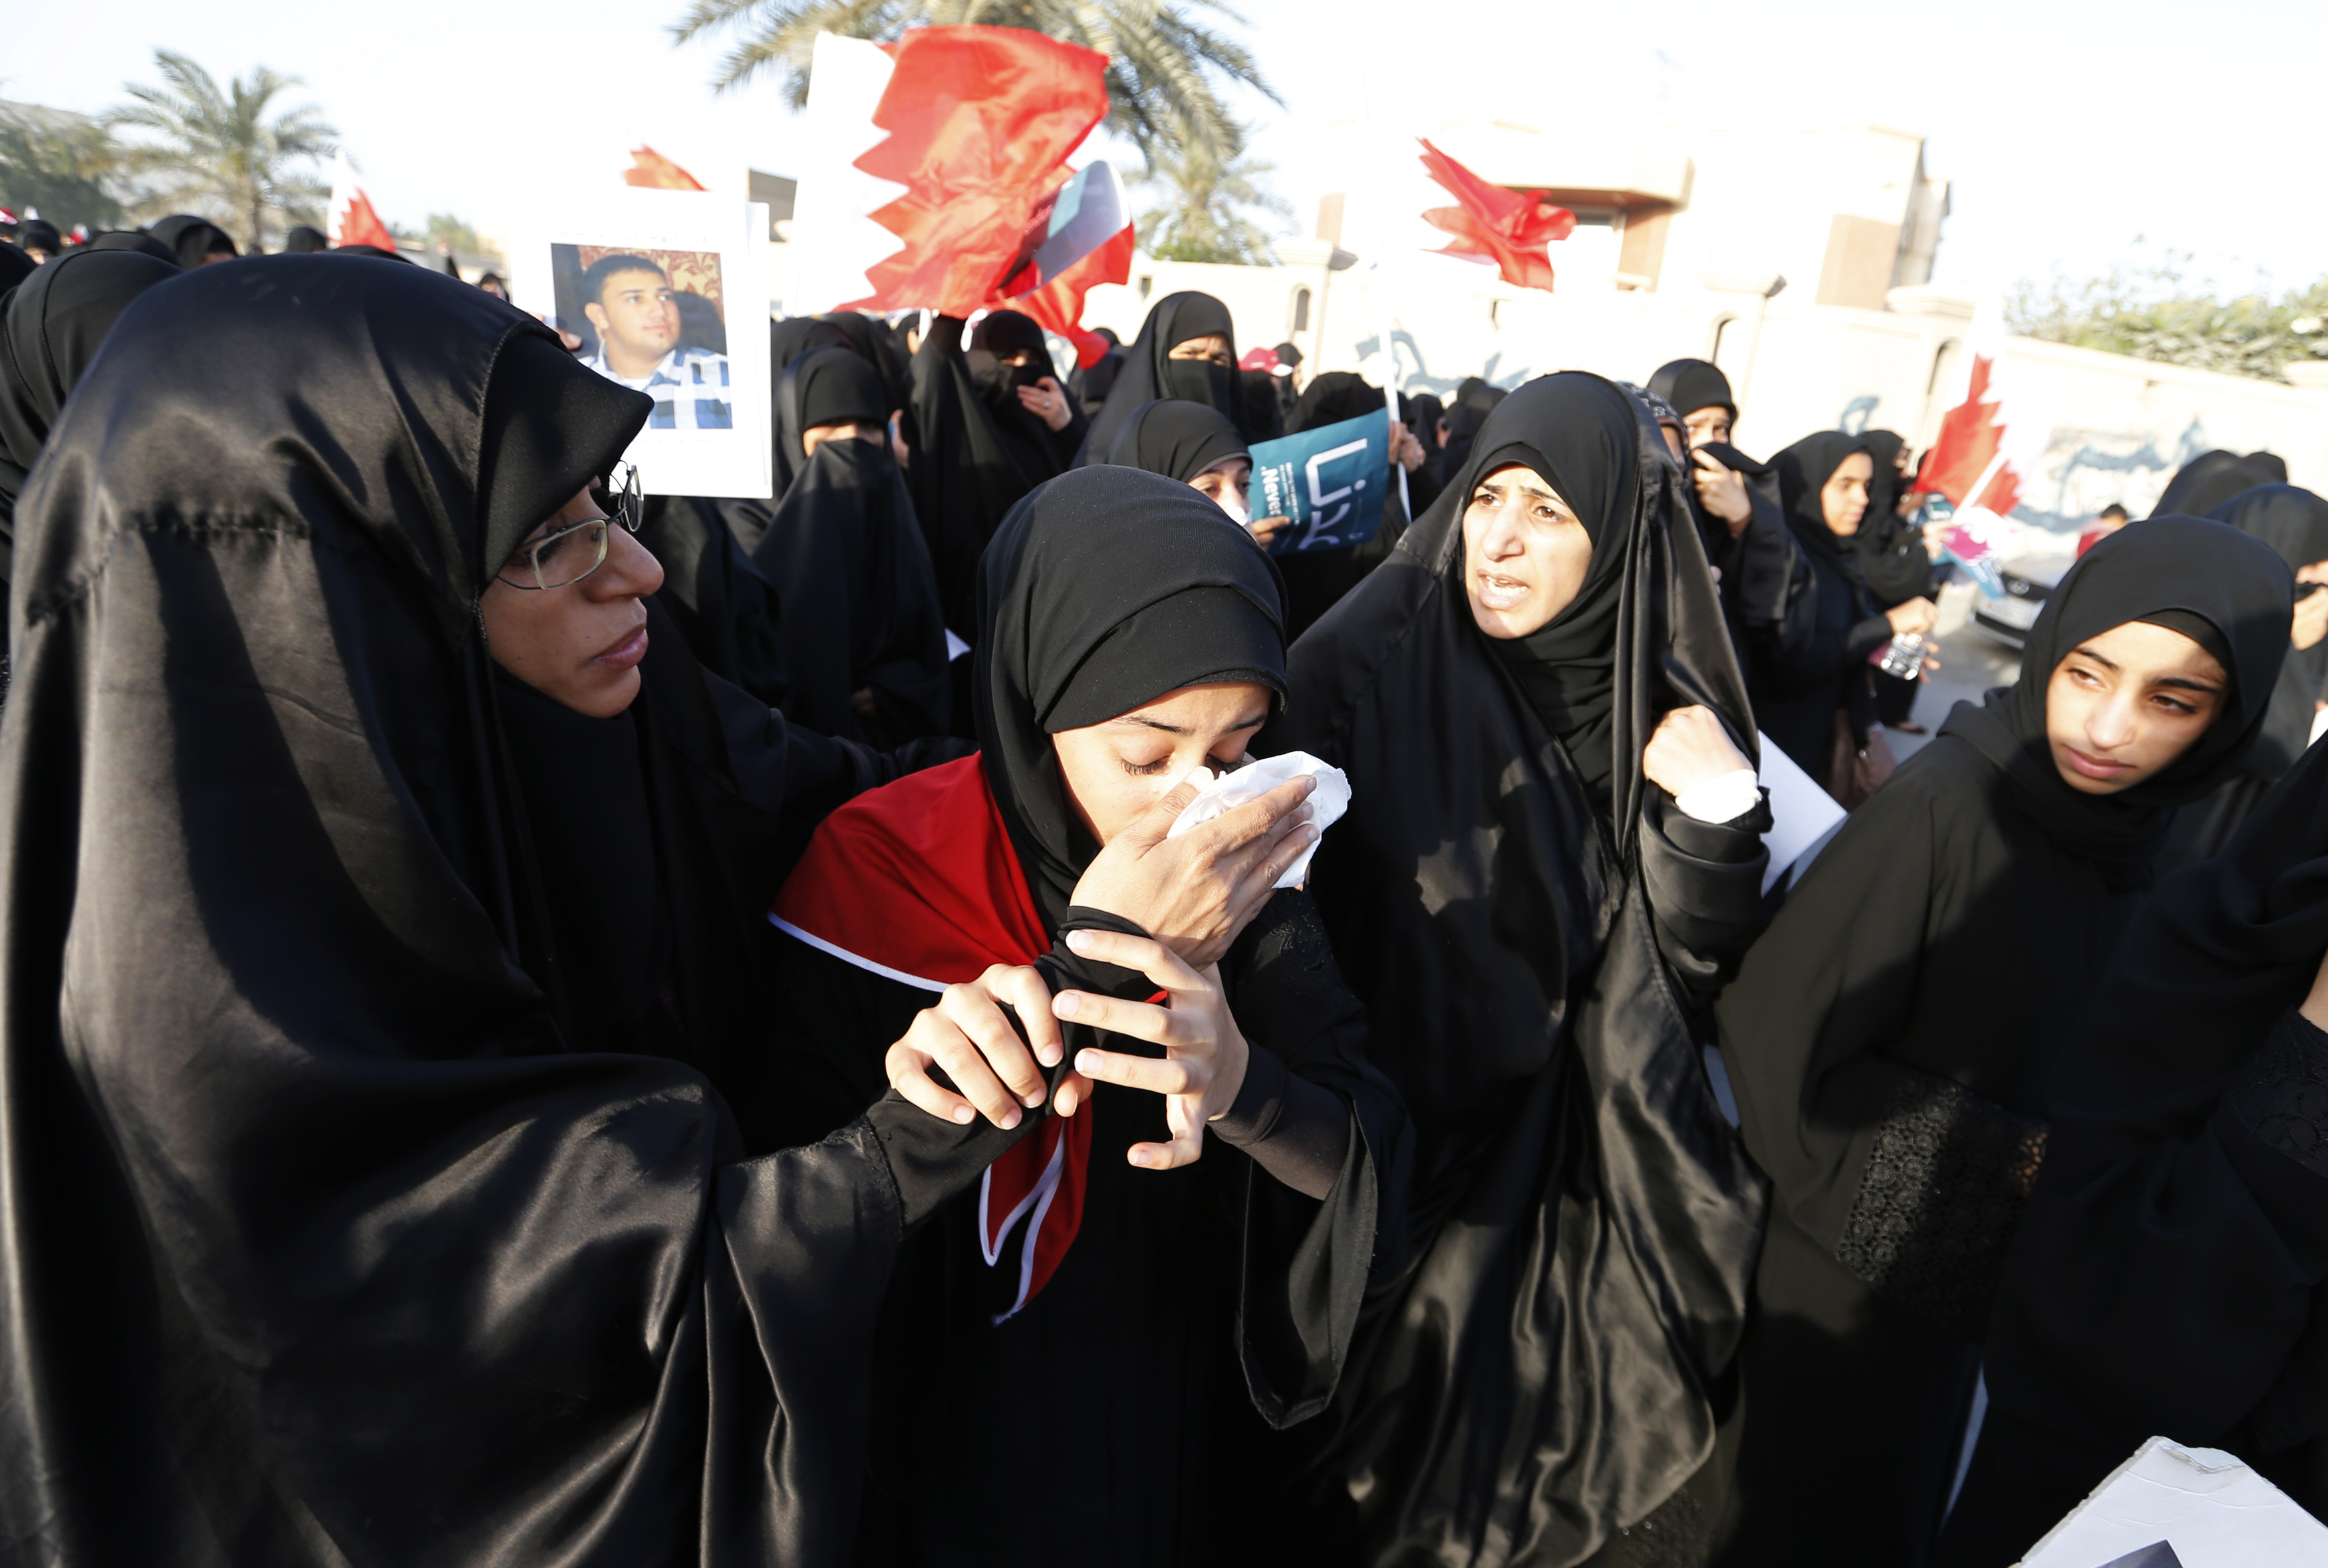 Anti-government protesters assist another protester as she reacts after inhaling tear gas fired by riot police in the village of Sanabis in Bahrain on 15 March 2013